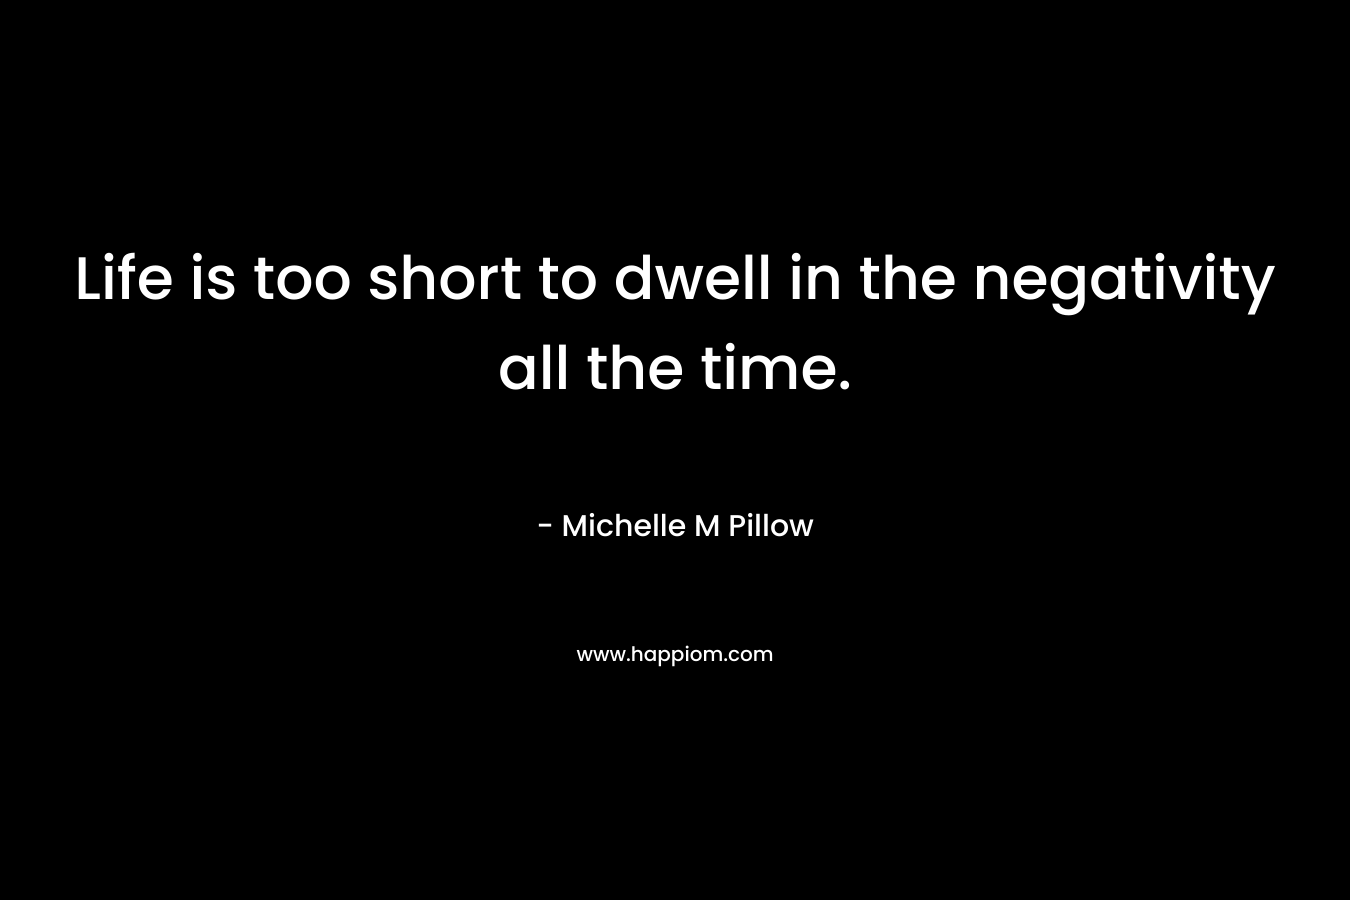 Life is too short to dwell in the negativity all the time.